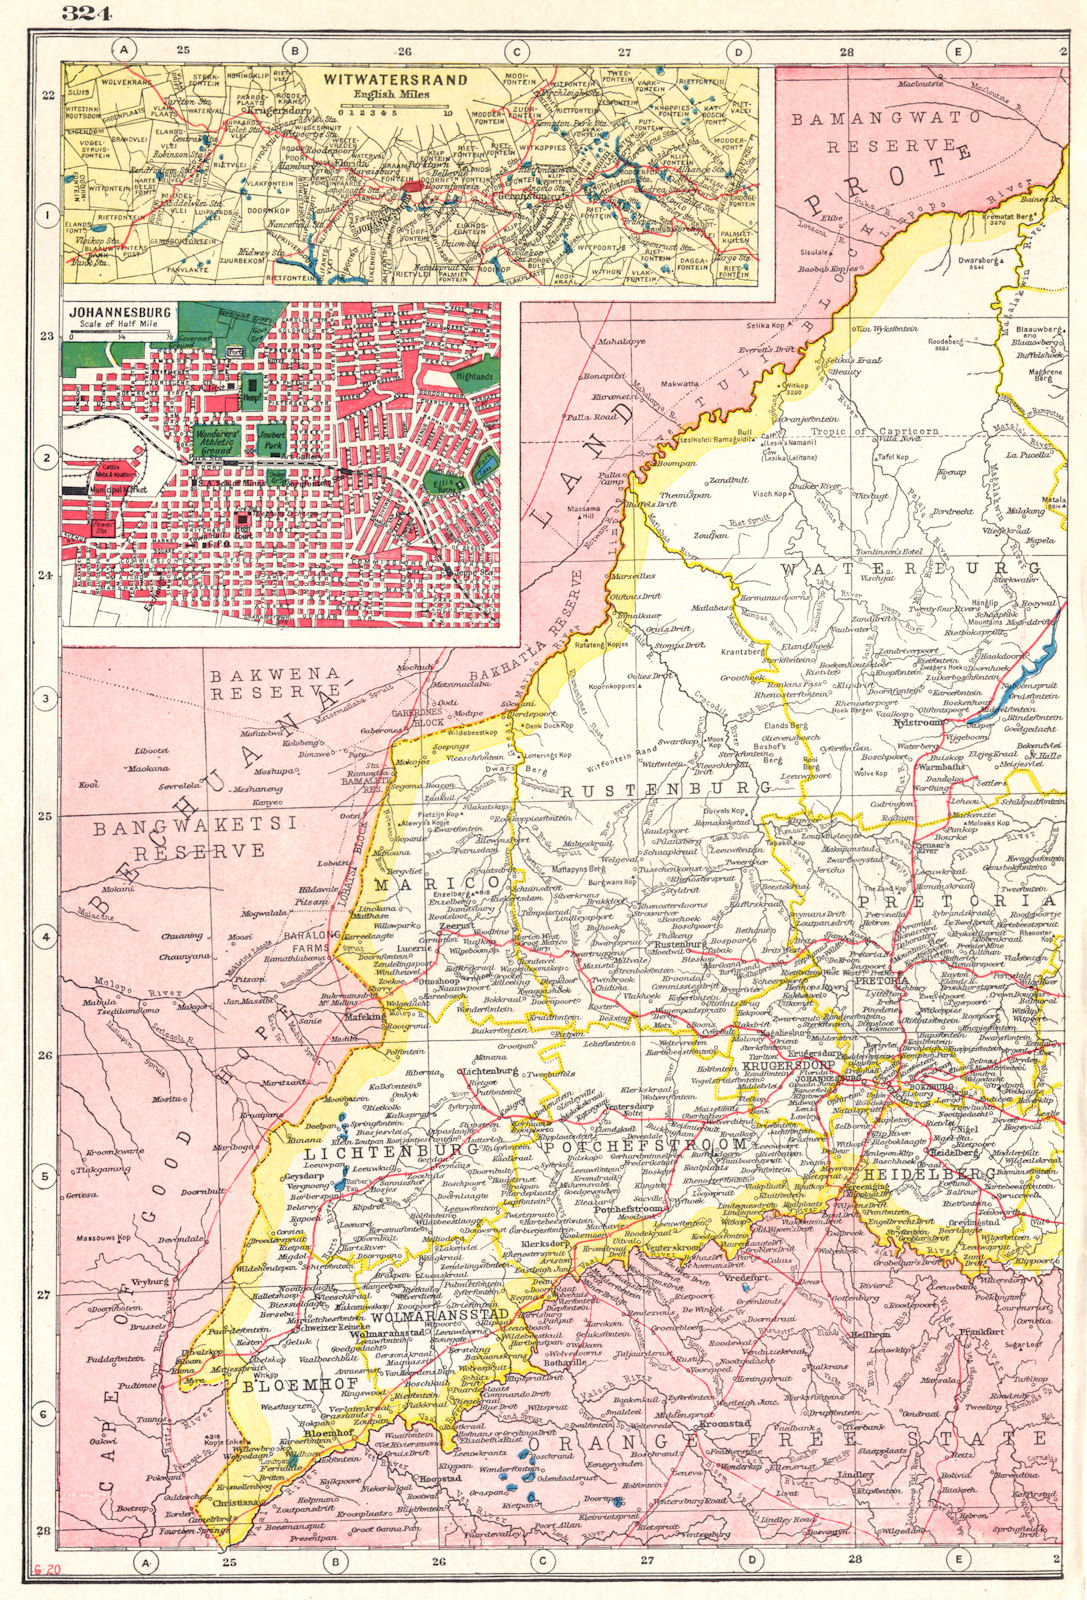 Associate Product TRANSVAAL WEST. SOUTH AFRICA. Inset Witwatersrand; Johannesburg 1920 old map